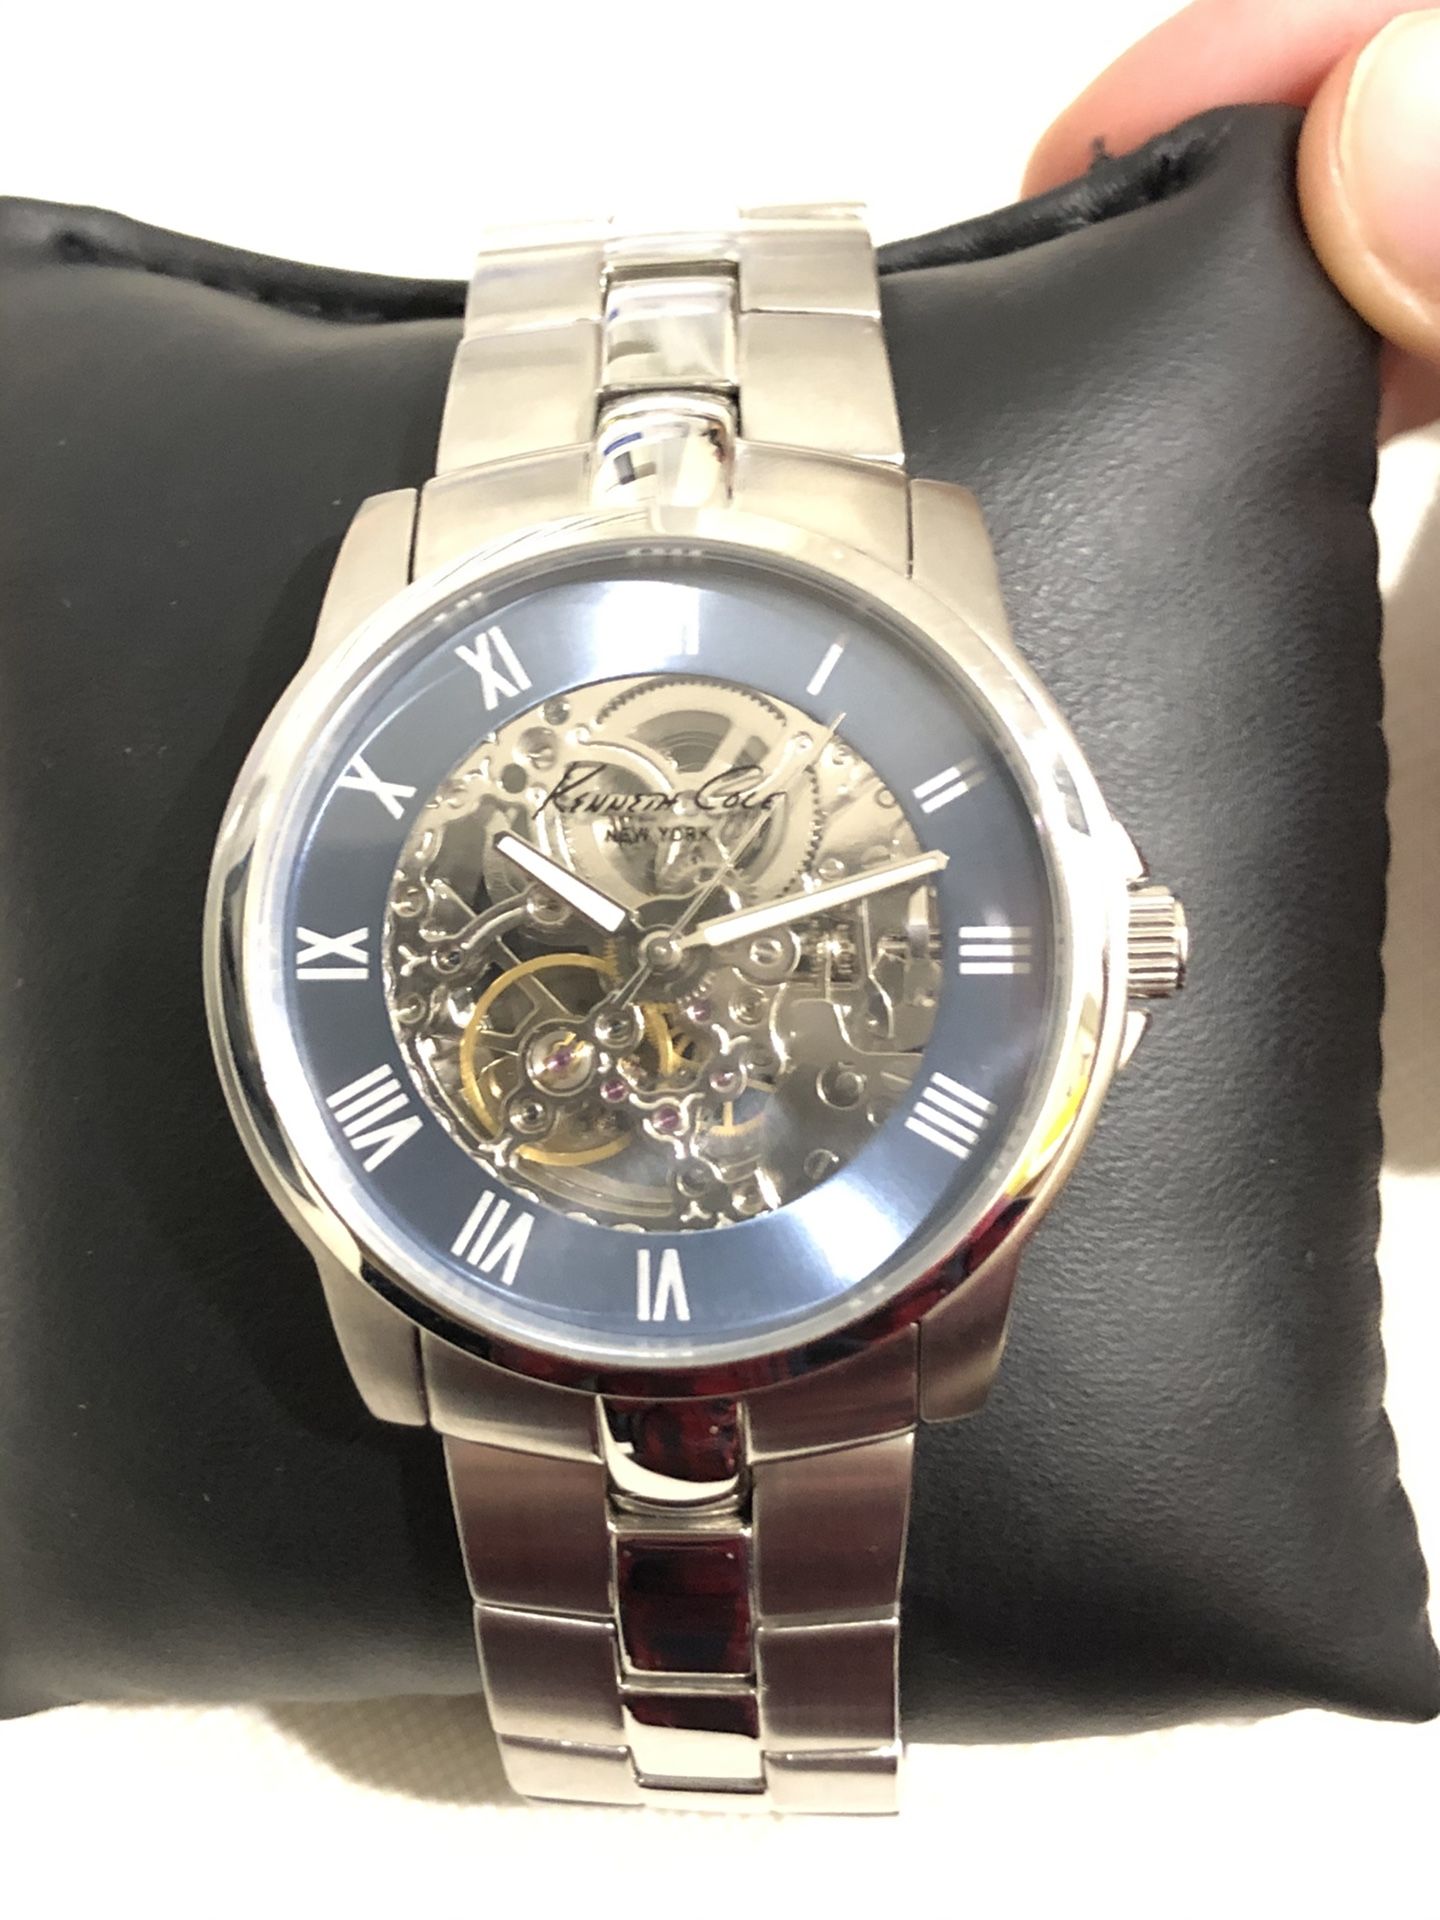 $185- Kenneth Cole Men’s Automatic Skeleton watch